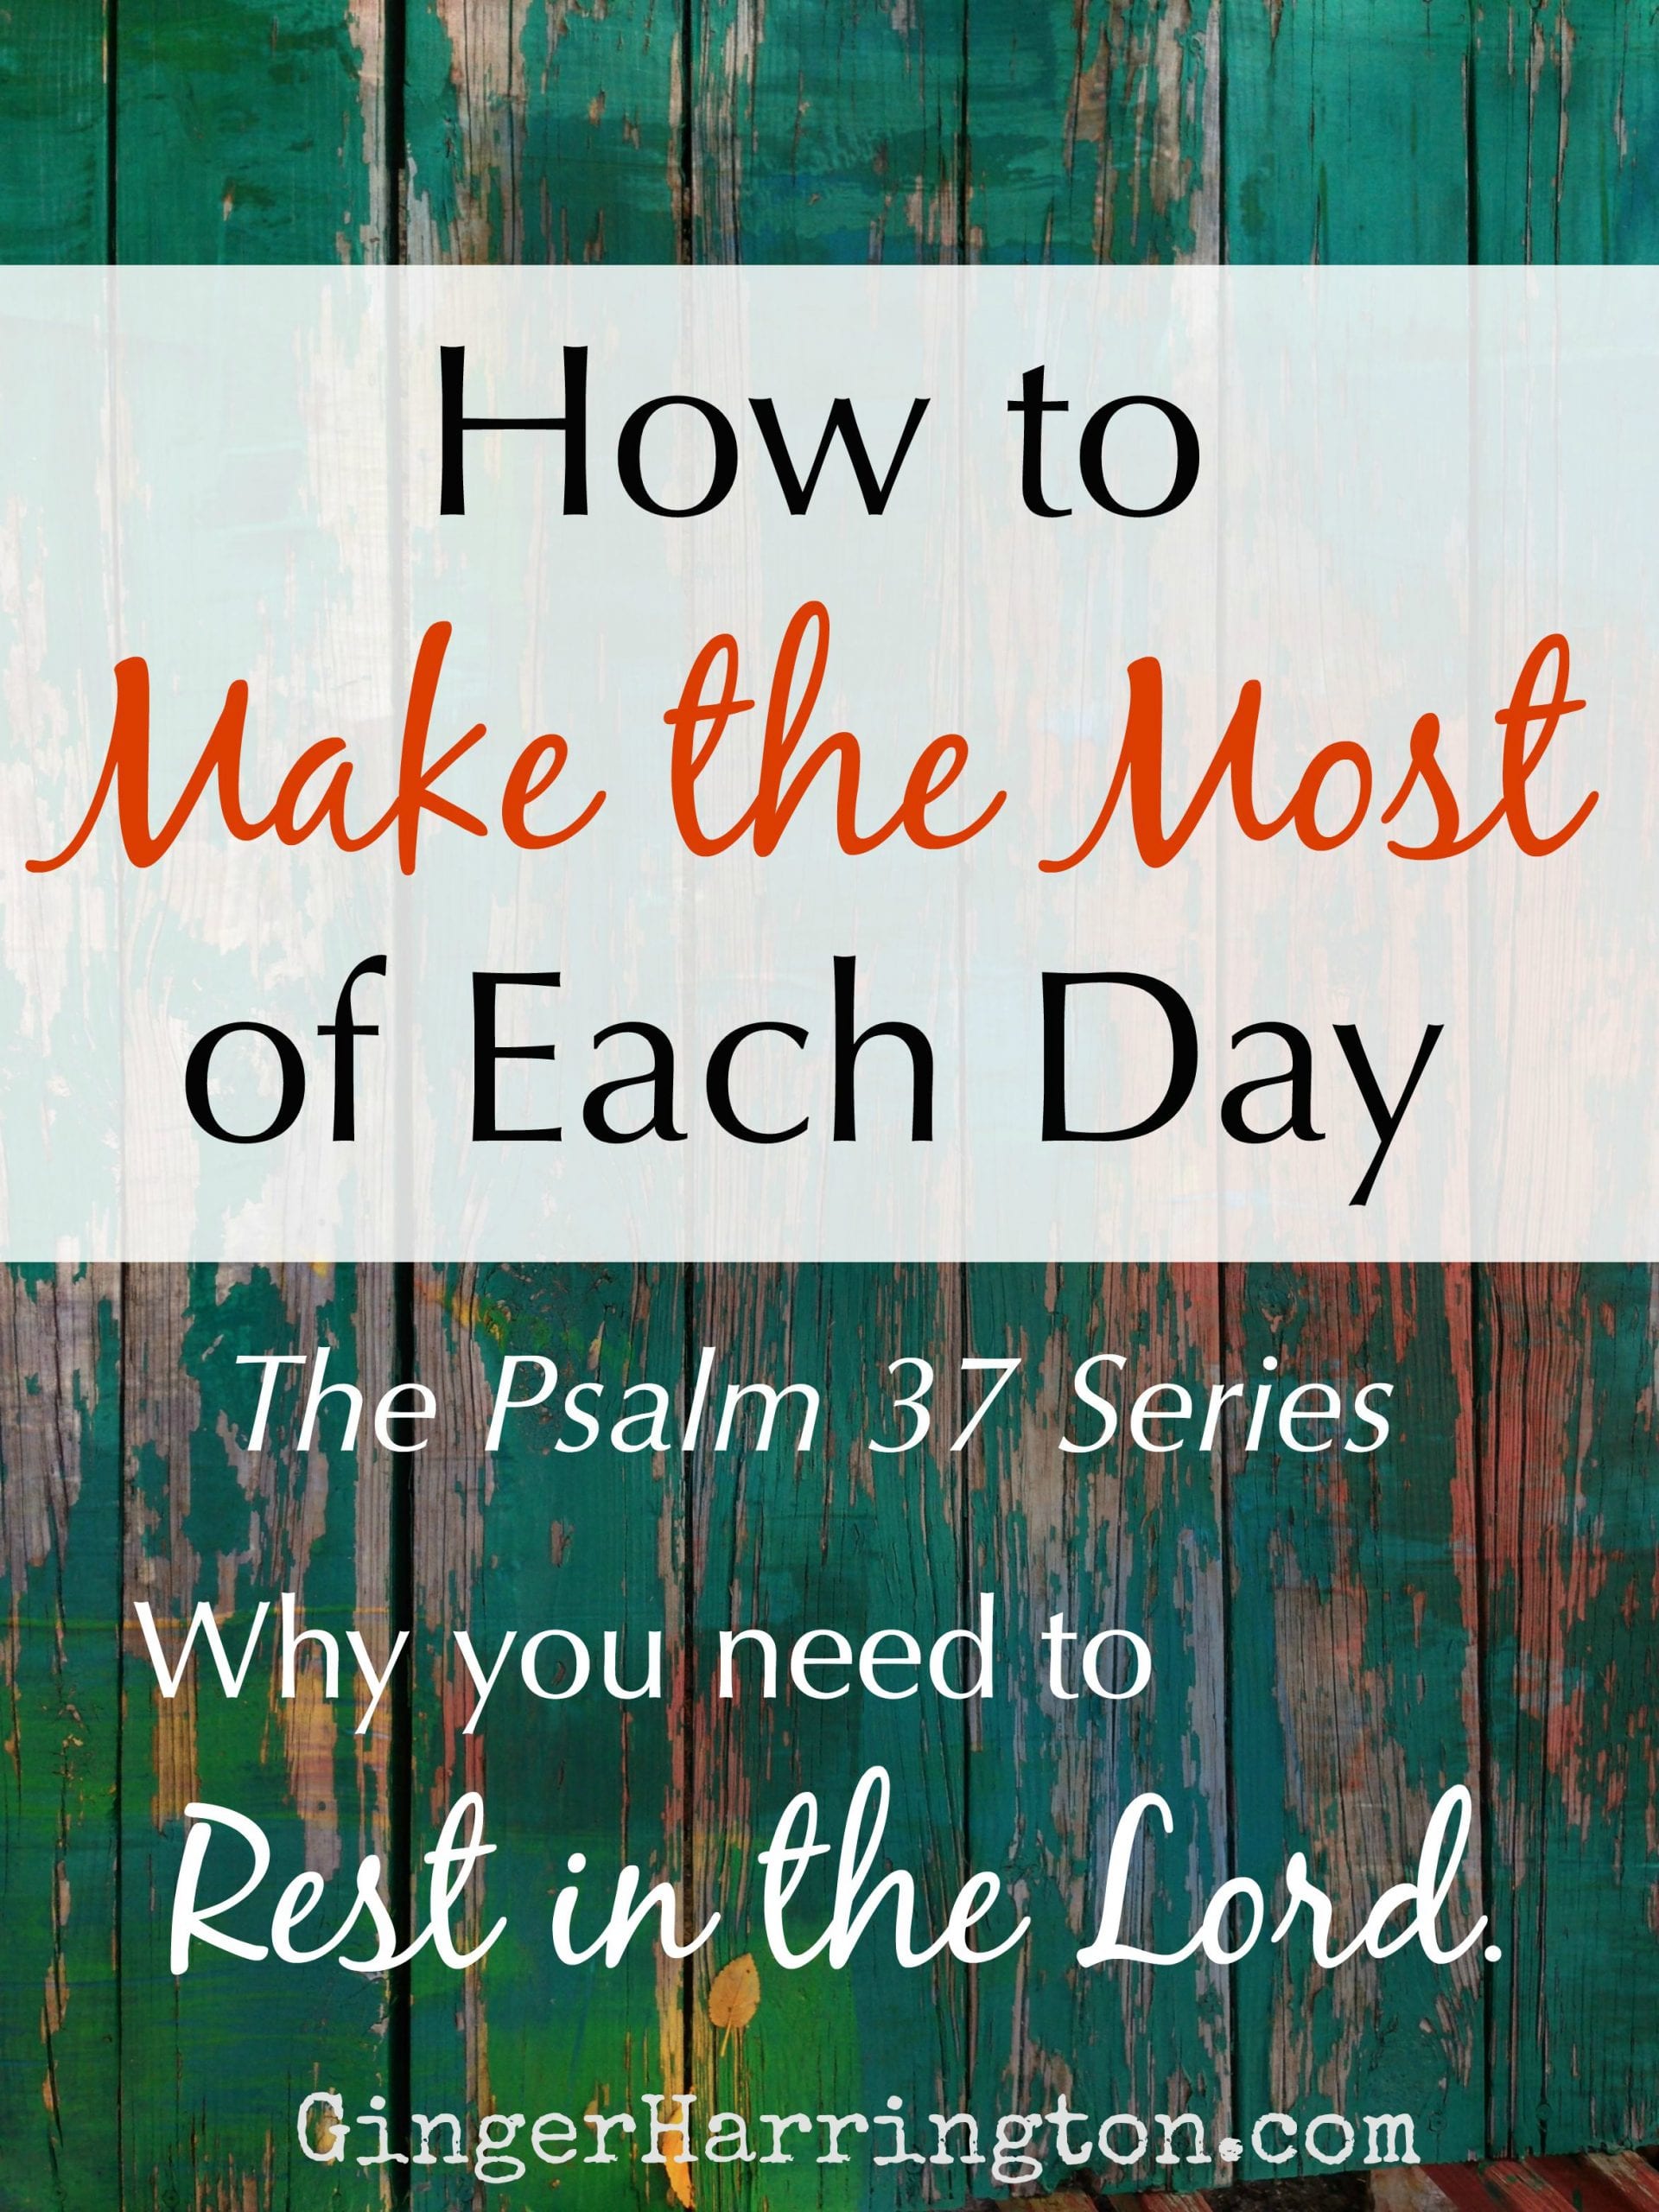 Why You Need to Rest in the Lord